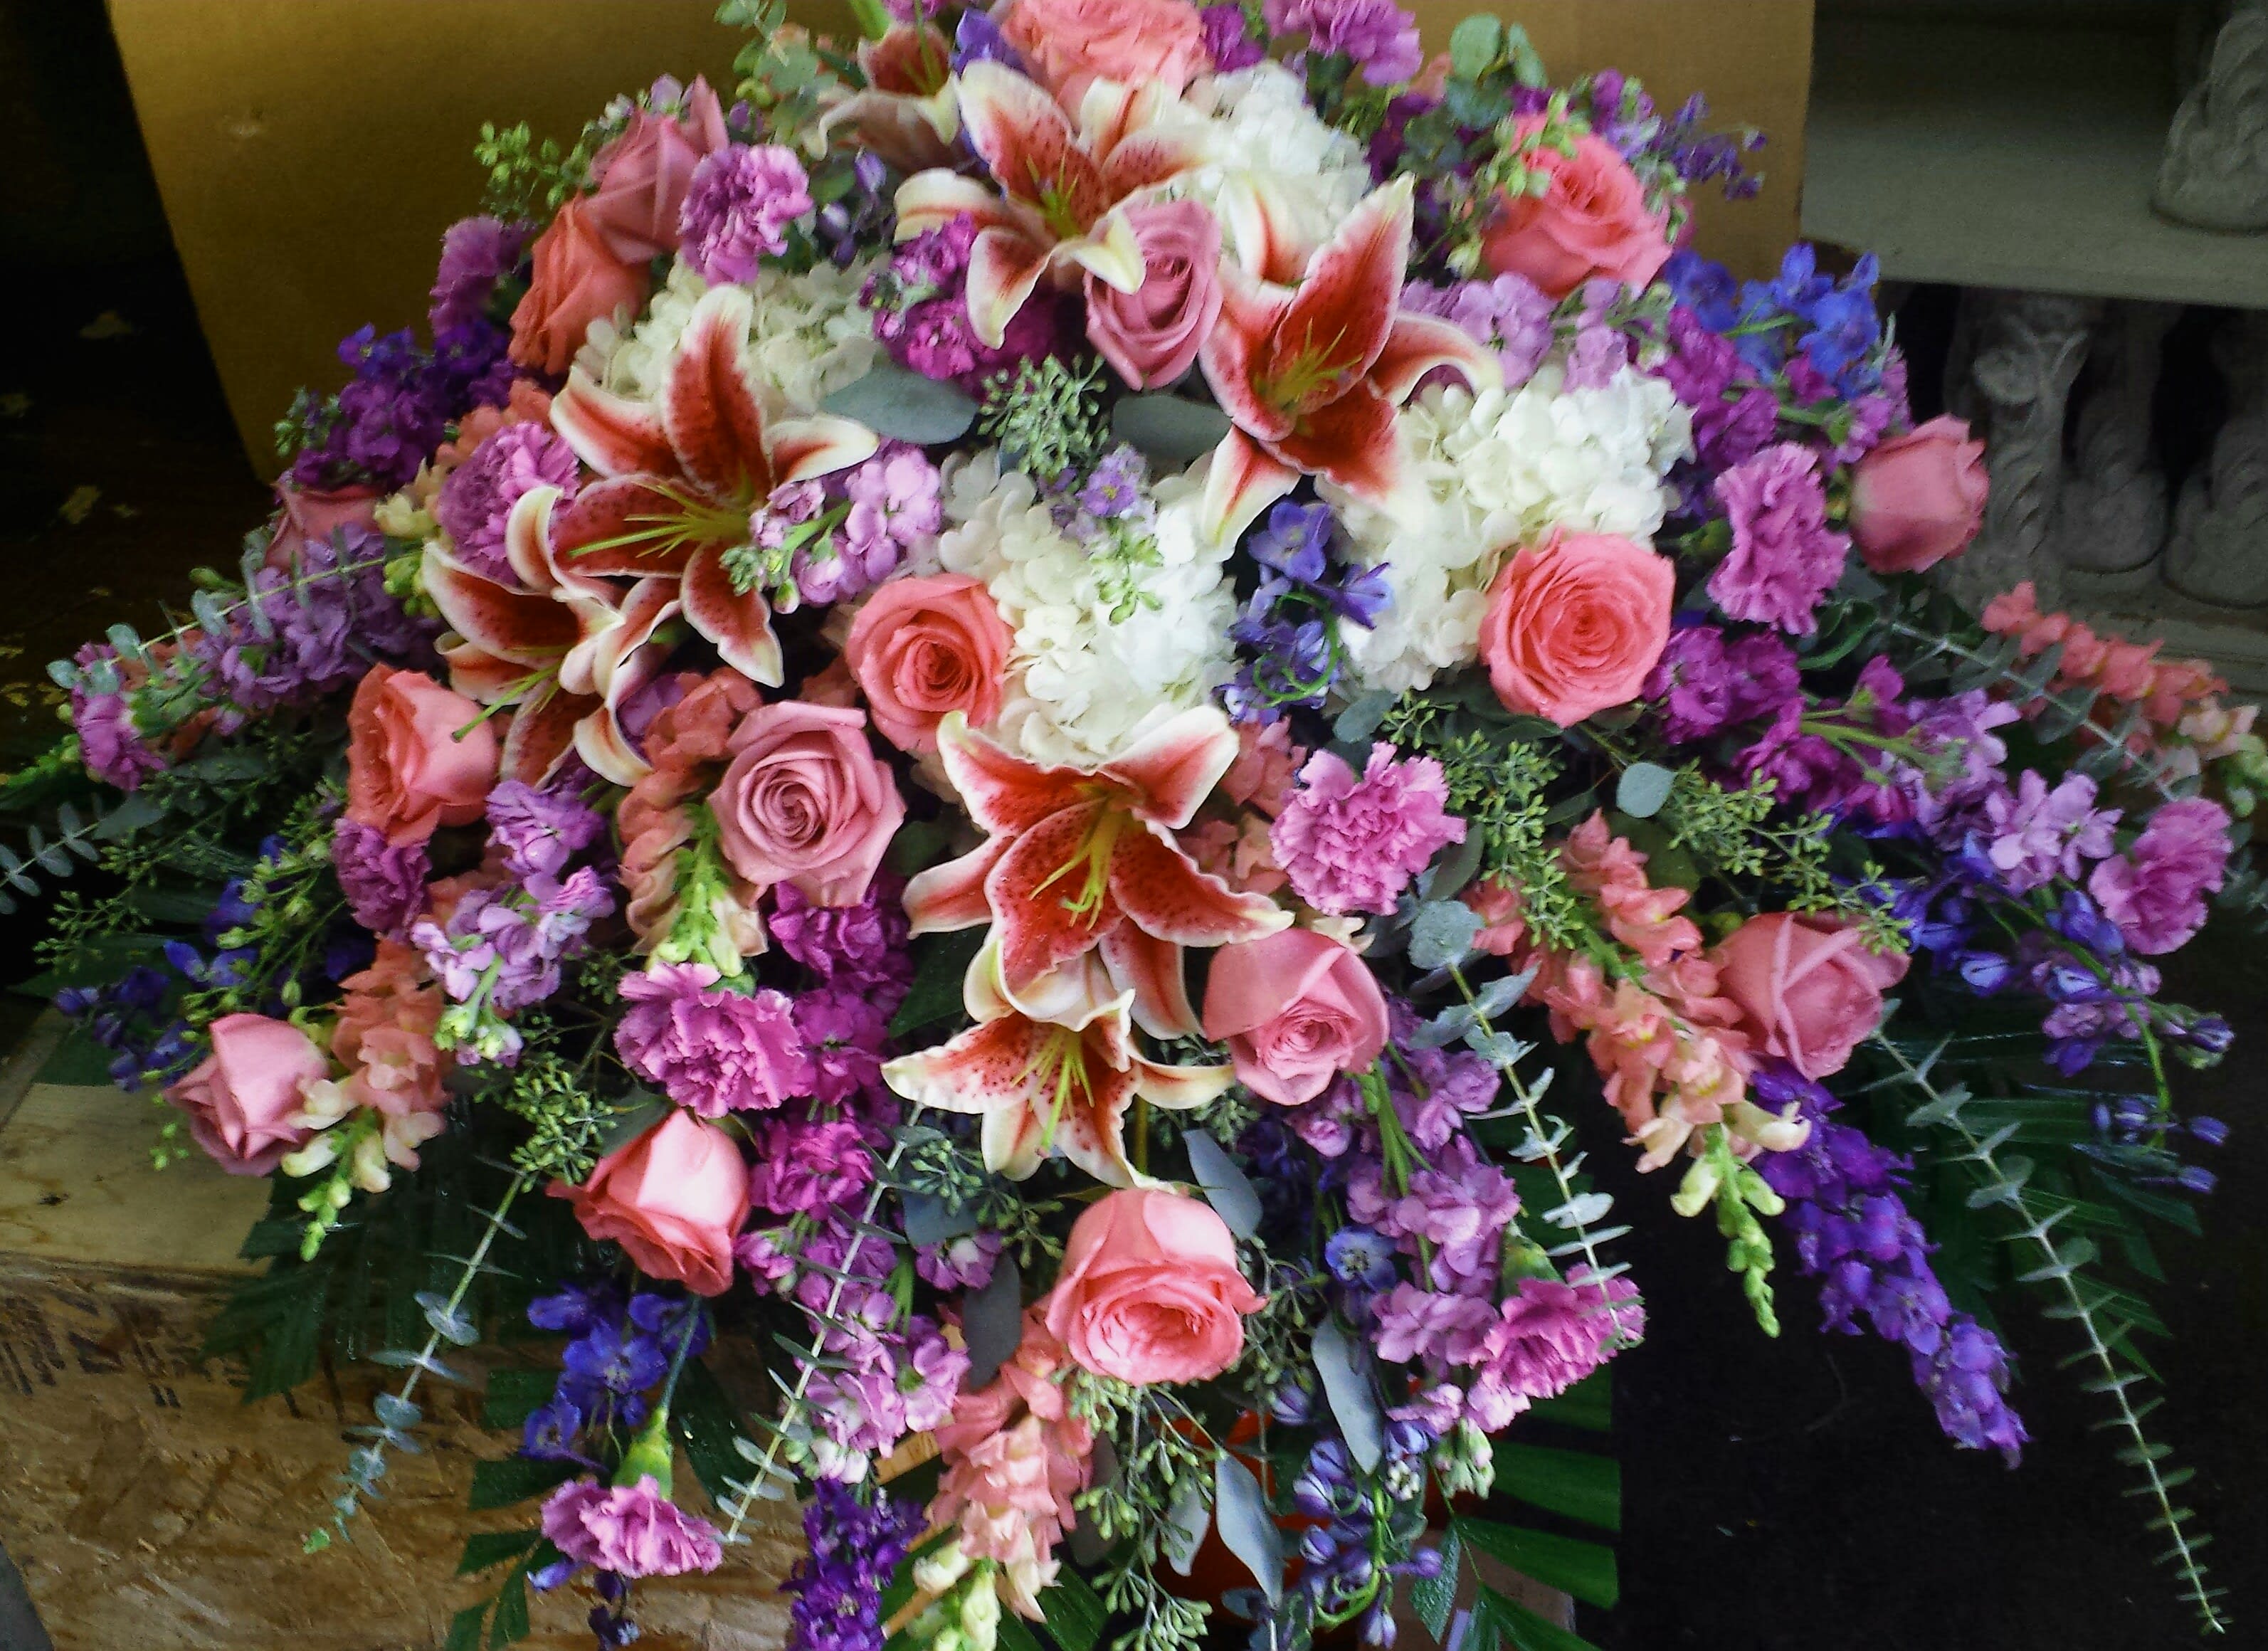 Eckert Florist's Stargazer Casket Spray - This casket spray features stargazer lilies, hydrangeas and a mix of our finest blooms in pinks, lavenders and purples.